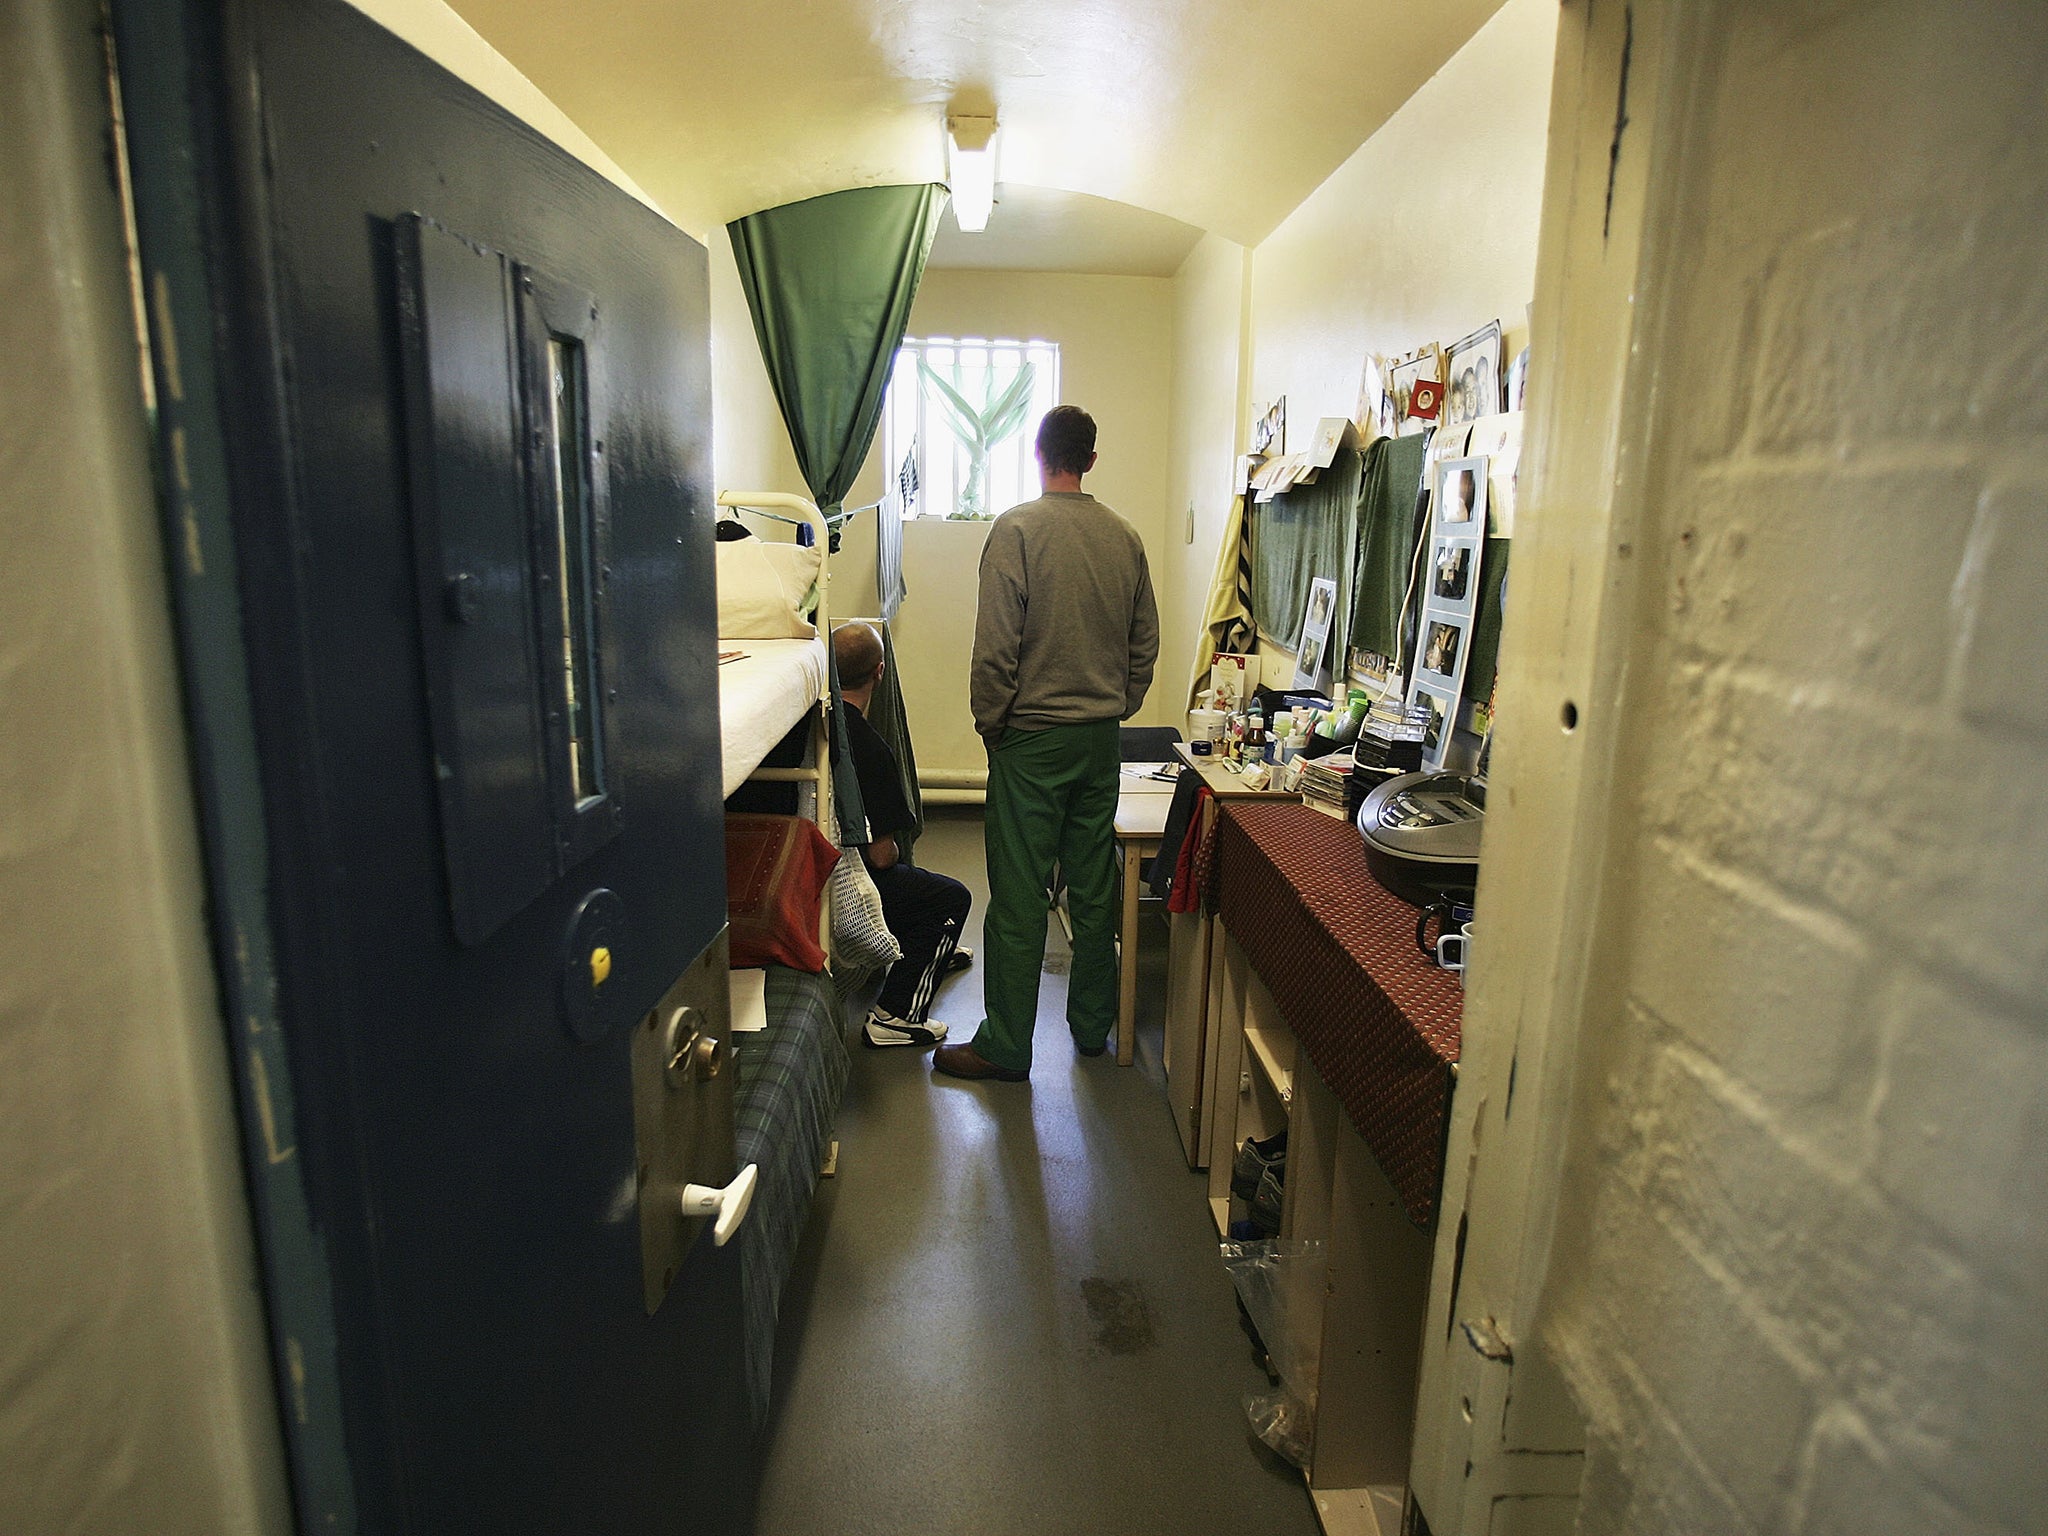 According to MoJ figures, almost 160,000 extra days of imprisonment were imposed last year as a result of adjudications, costing taxpayers an estimated £15m in further detention costs